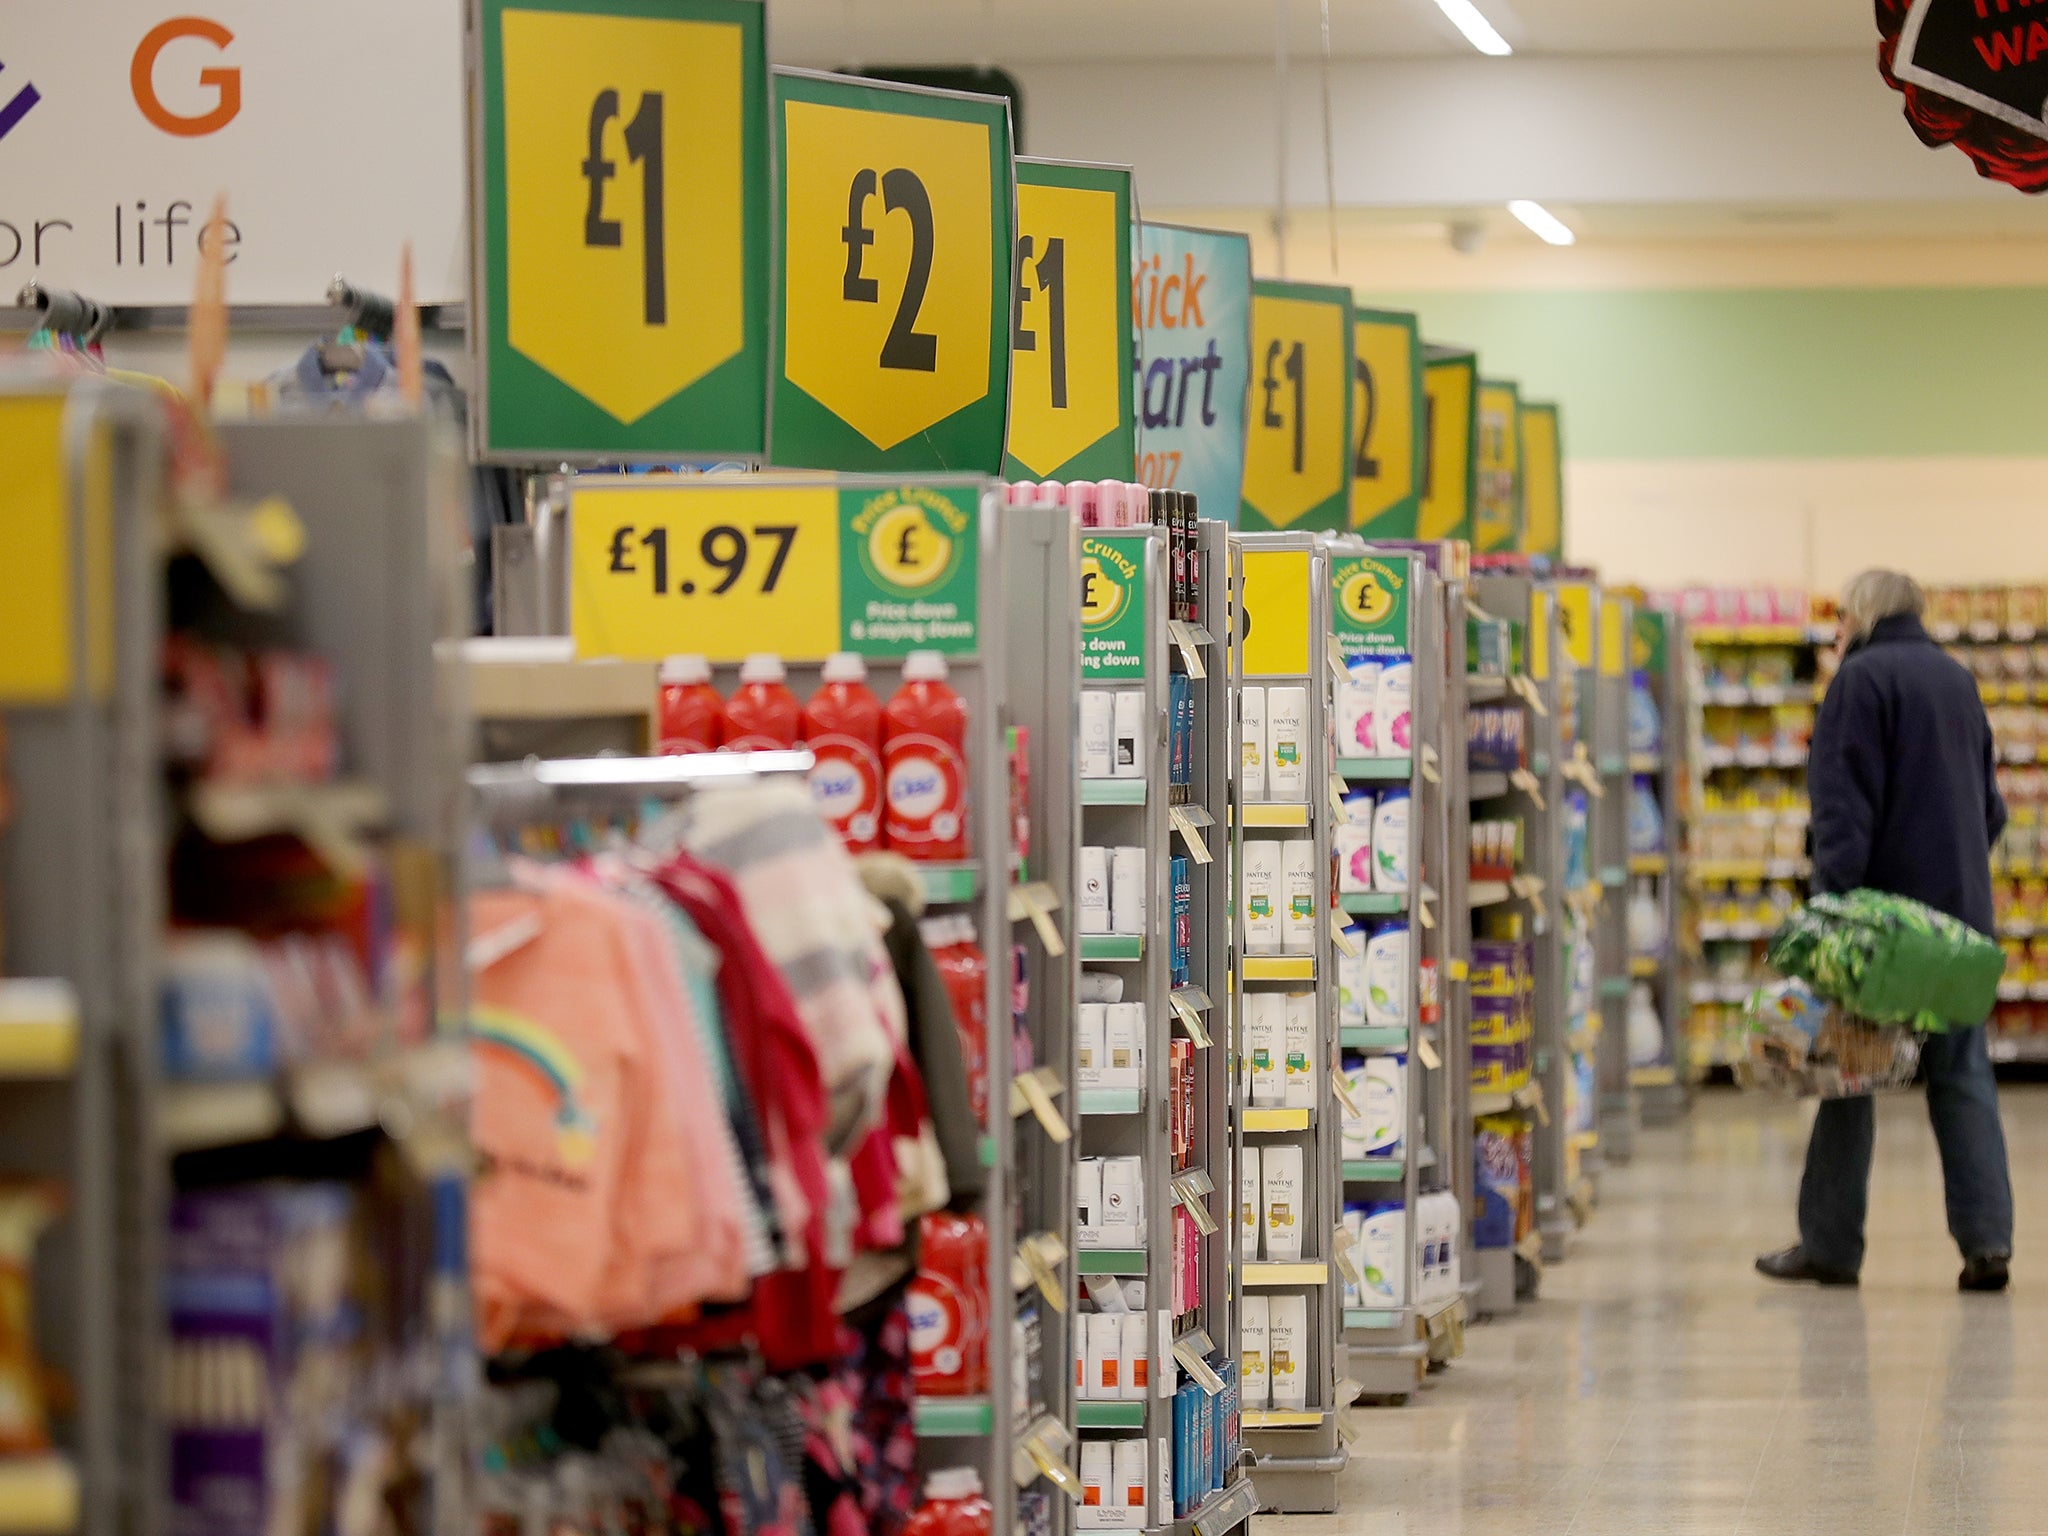 Morrisons has talked of a supermarket renaissance. The numbers don’t quite justify it